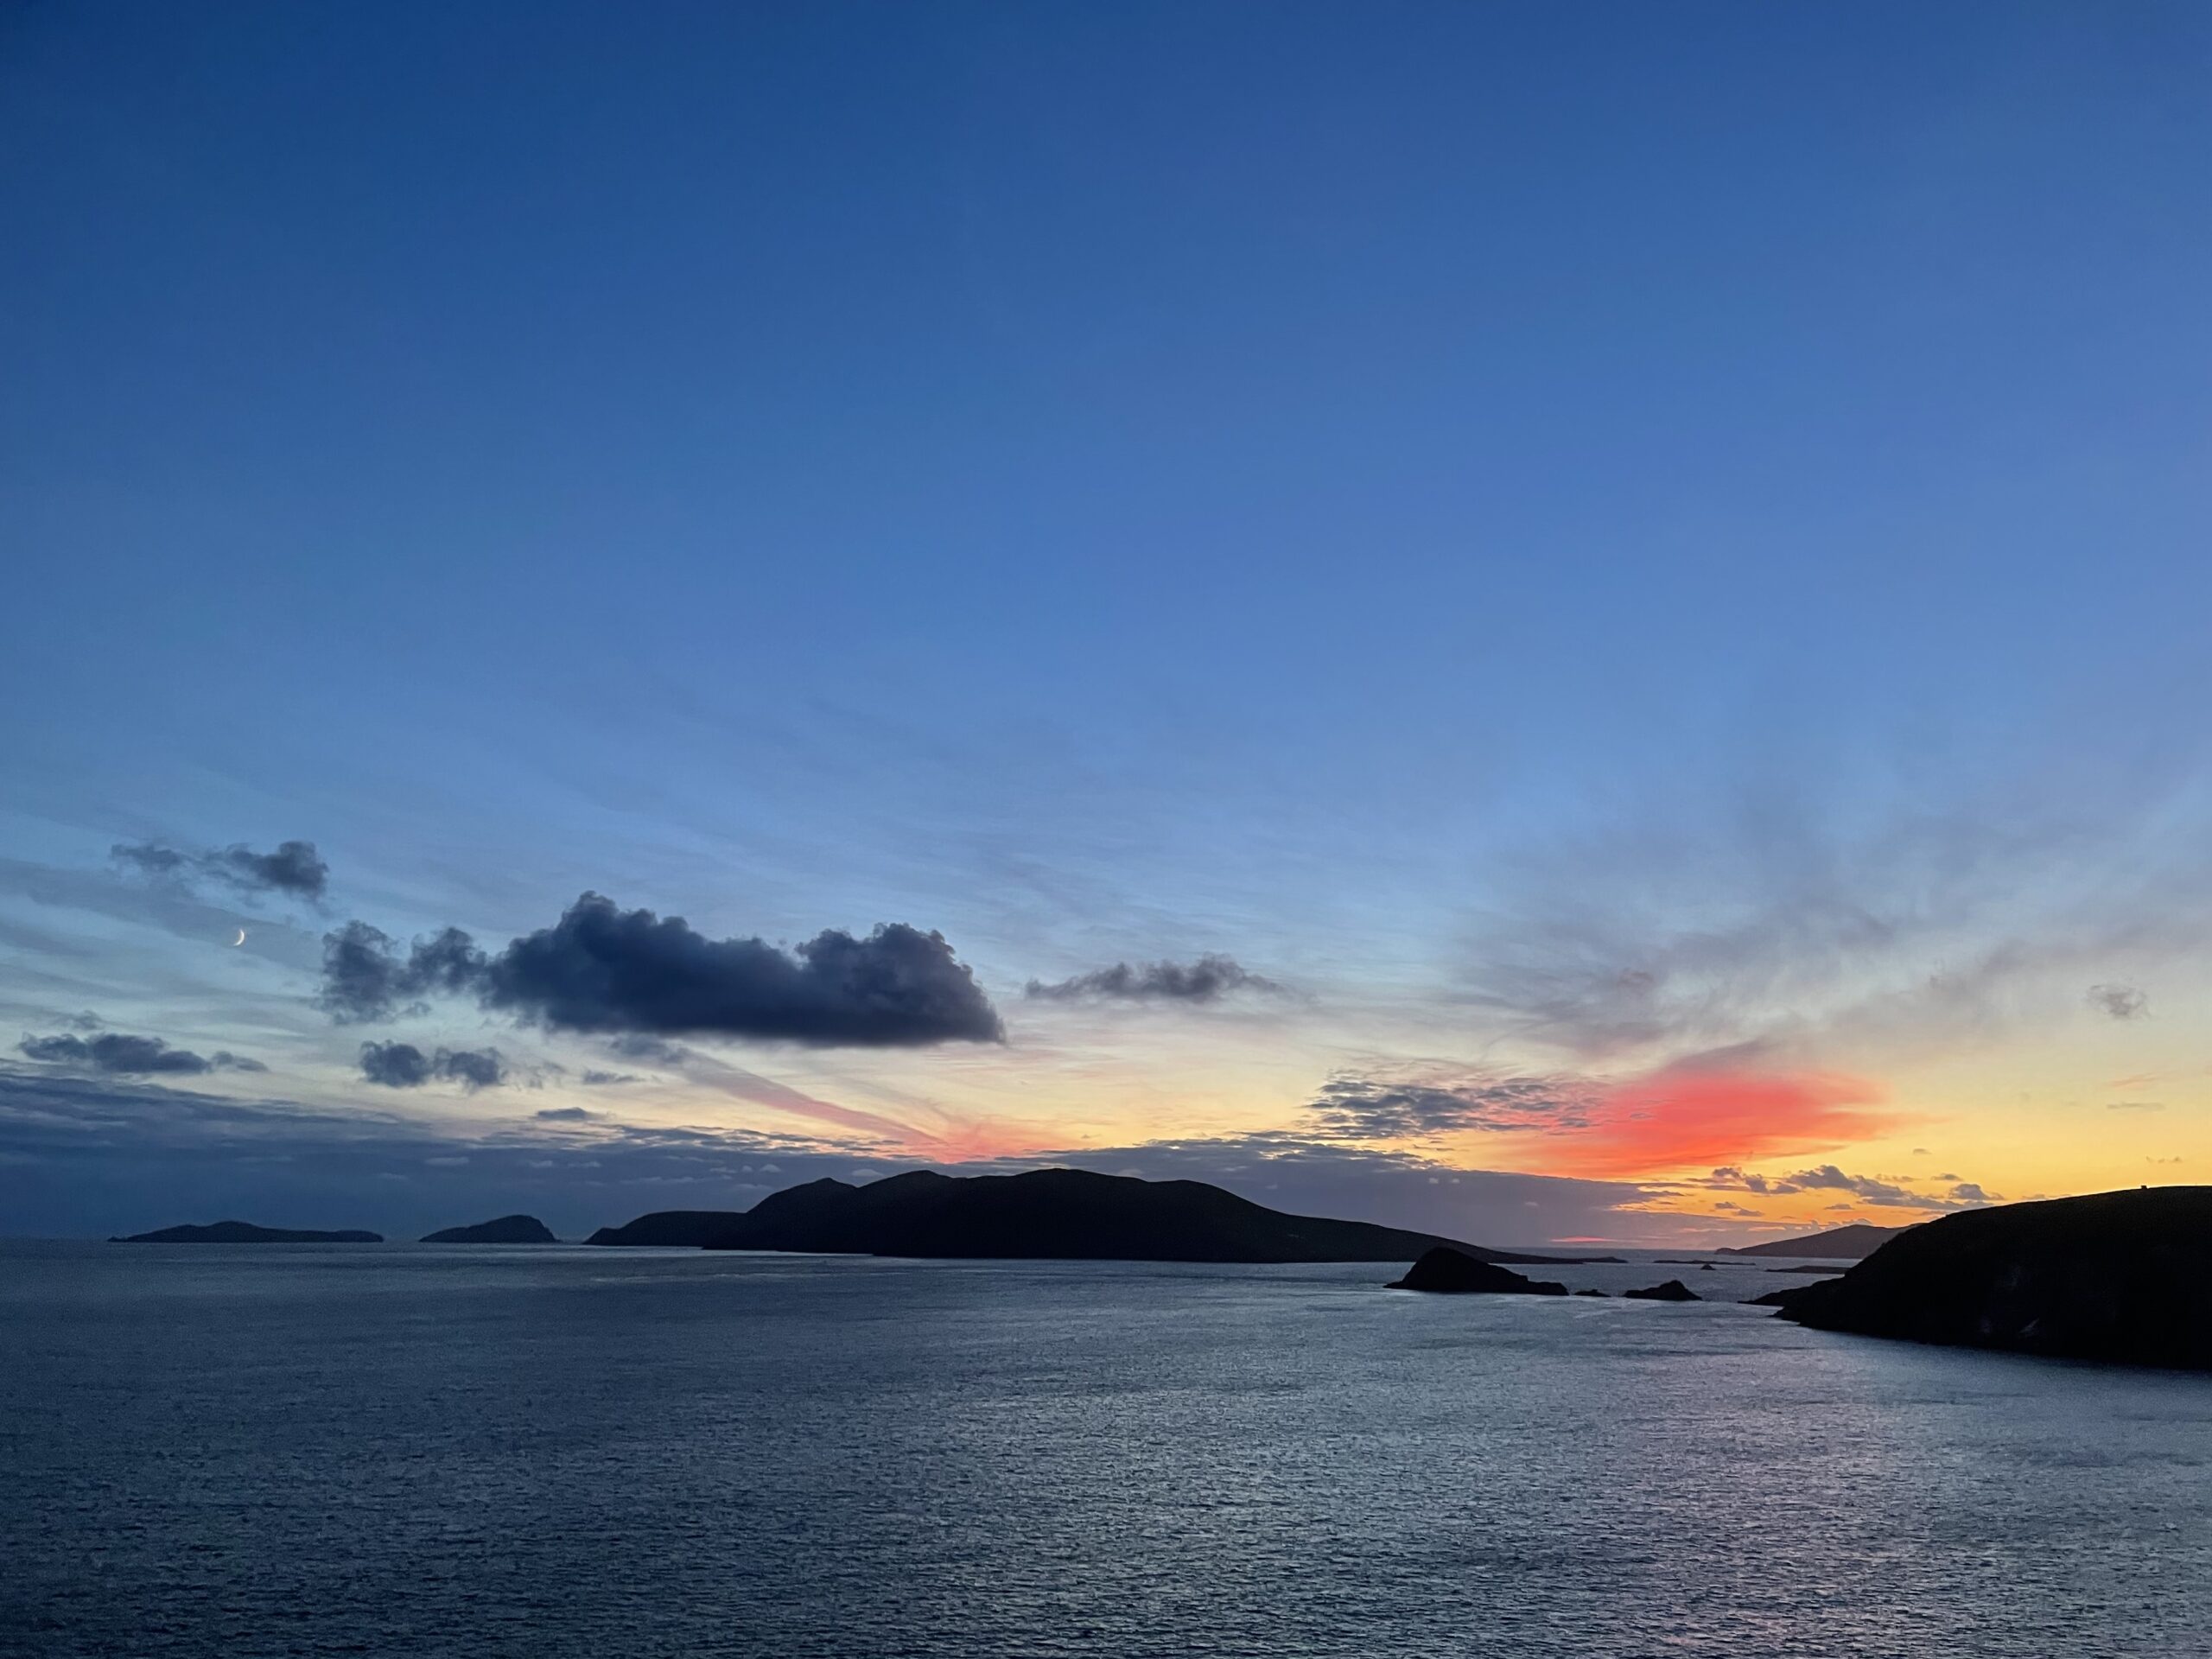 Catch some sunsets at one of the best hidden gems in Ireland: Slea Head